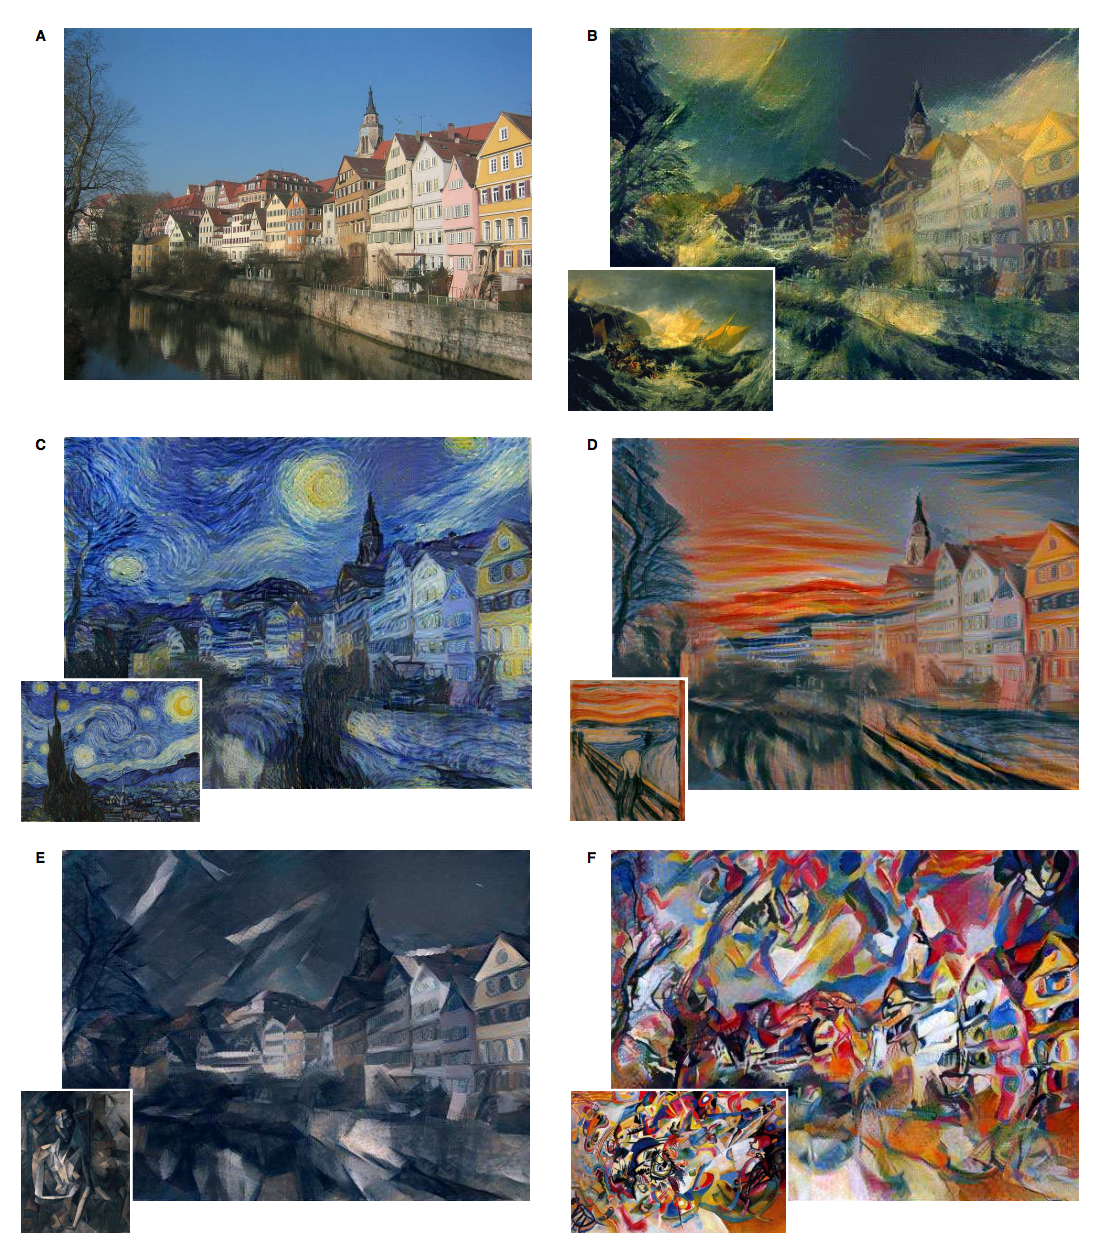 30 amazing applications of deep learning